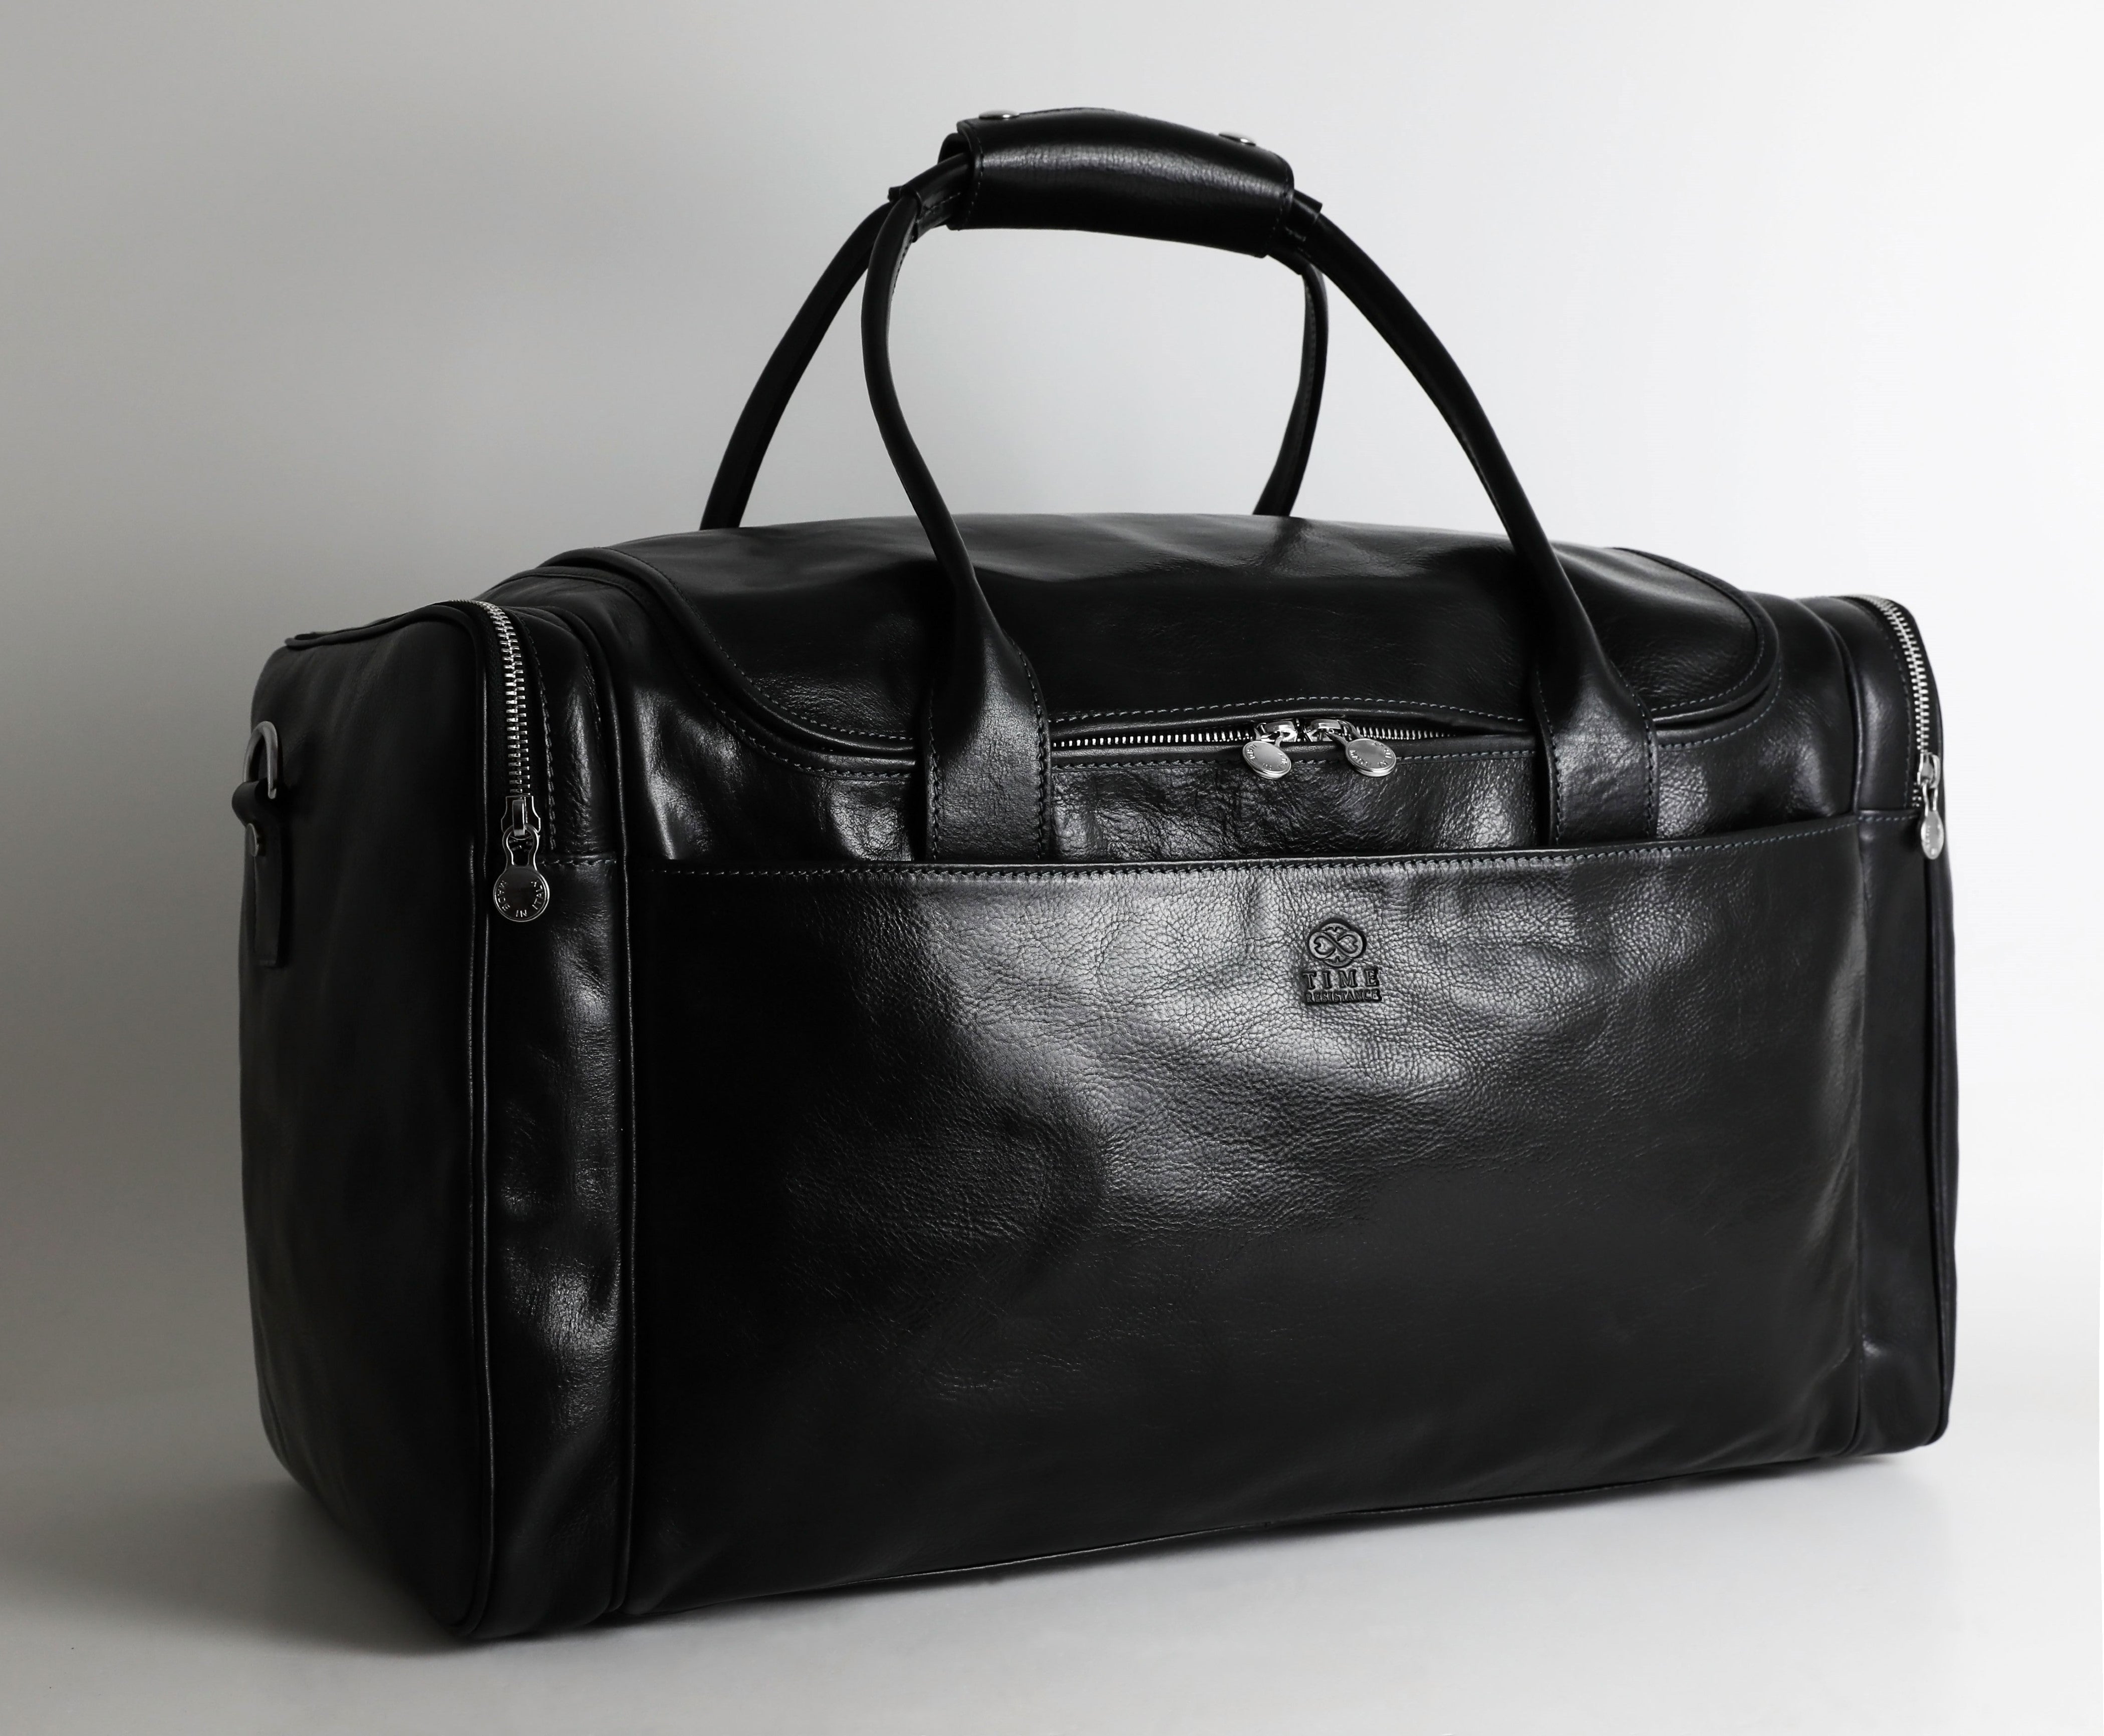 Large Italian Leather Duffel Bag - The Hitchhikers Guide to the Galaxy